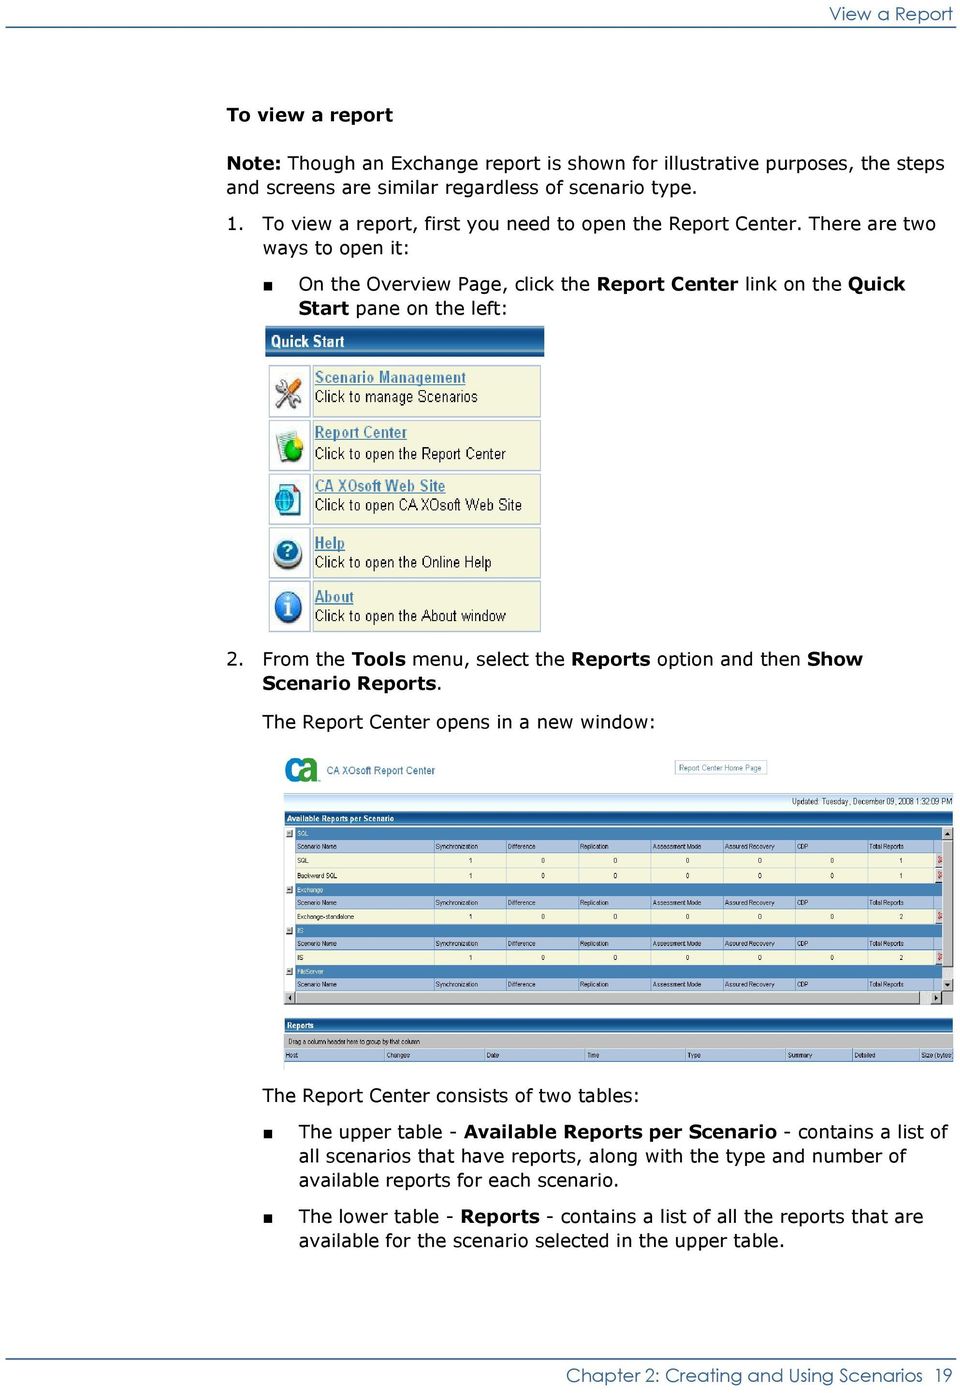 From the Tools menu, select the Reports option and then Show Scenario Reports.